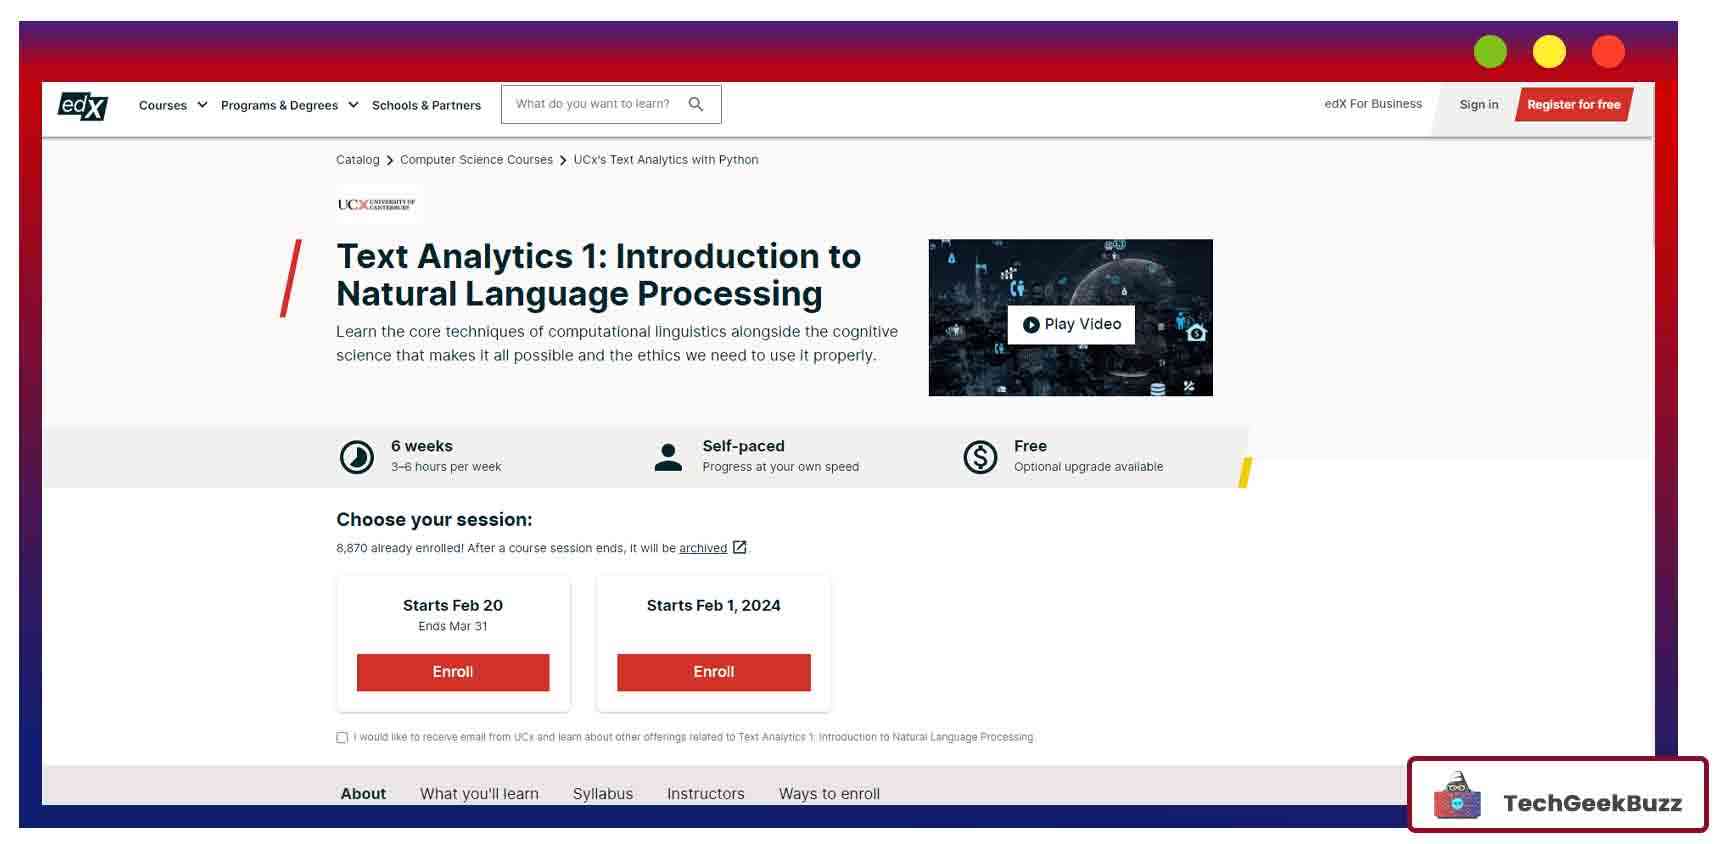 Text Analytics 1: Introduction to Natural Language Processing